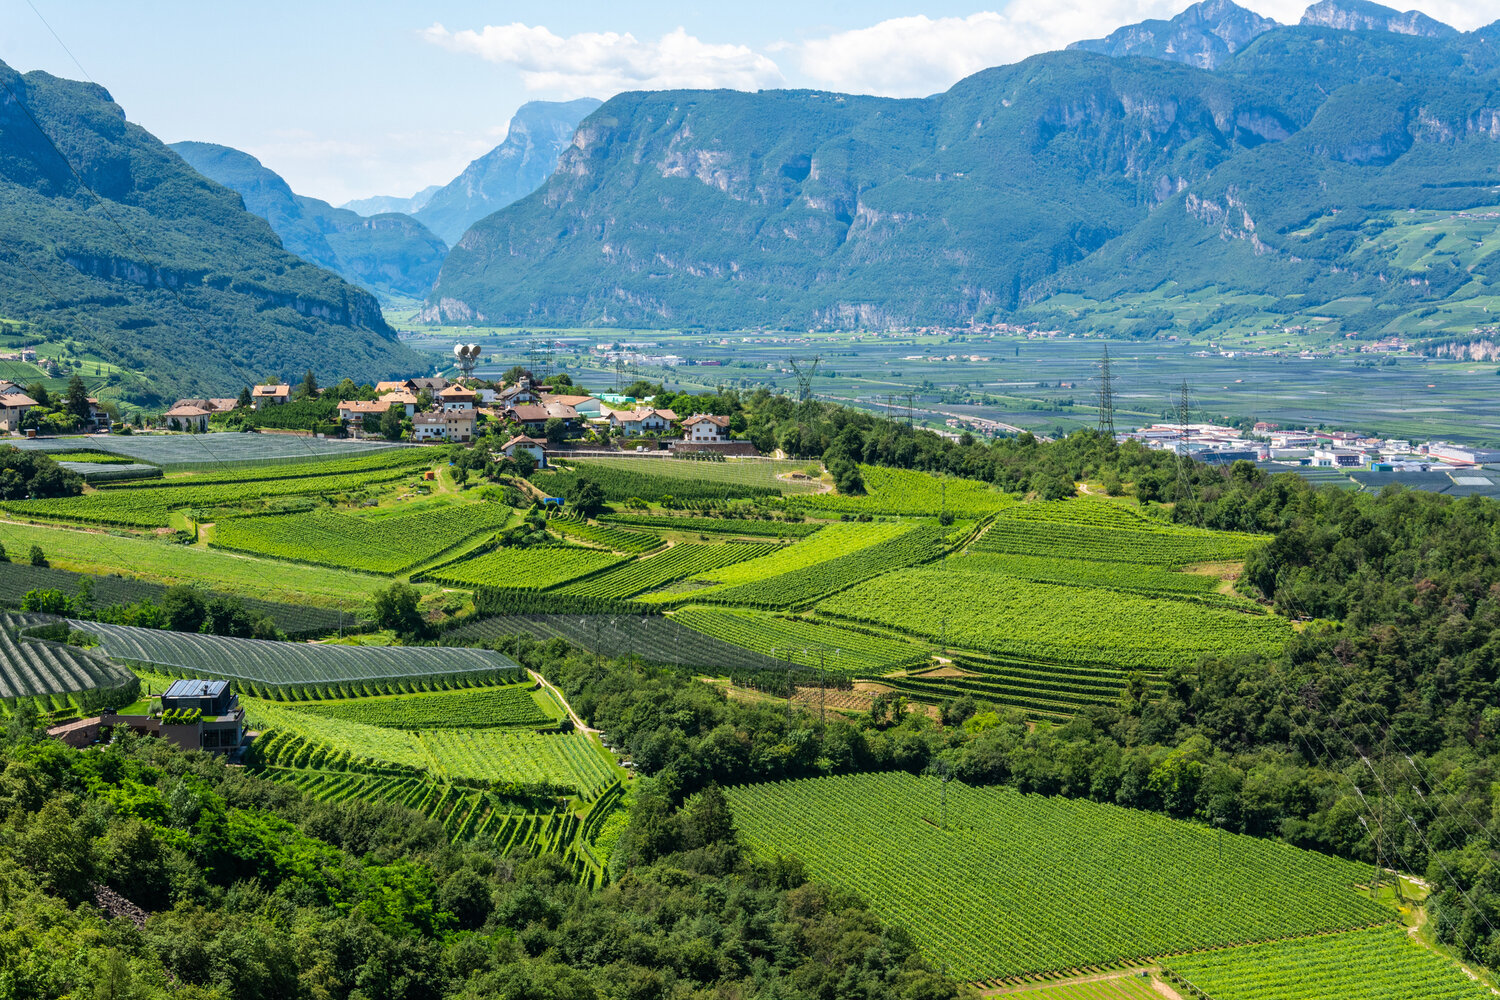 Looking south over the vineyards of northern Italy near the Austrian border.